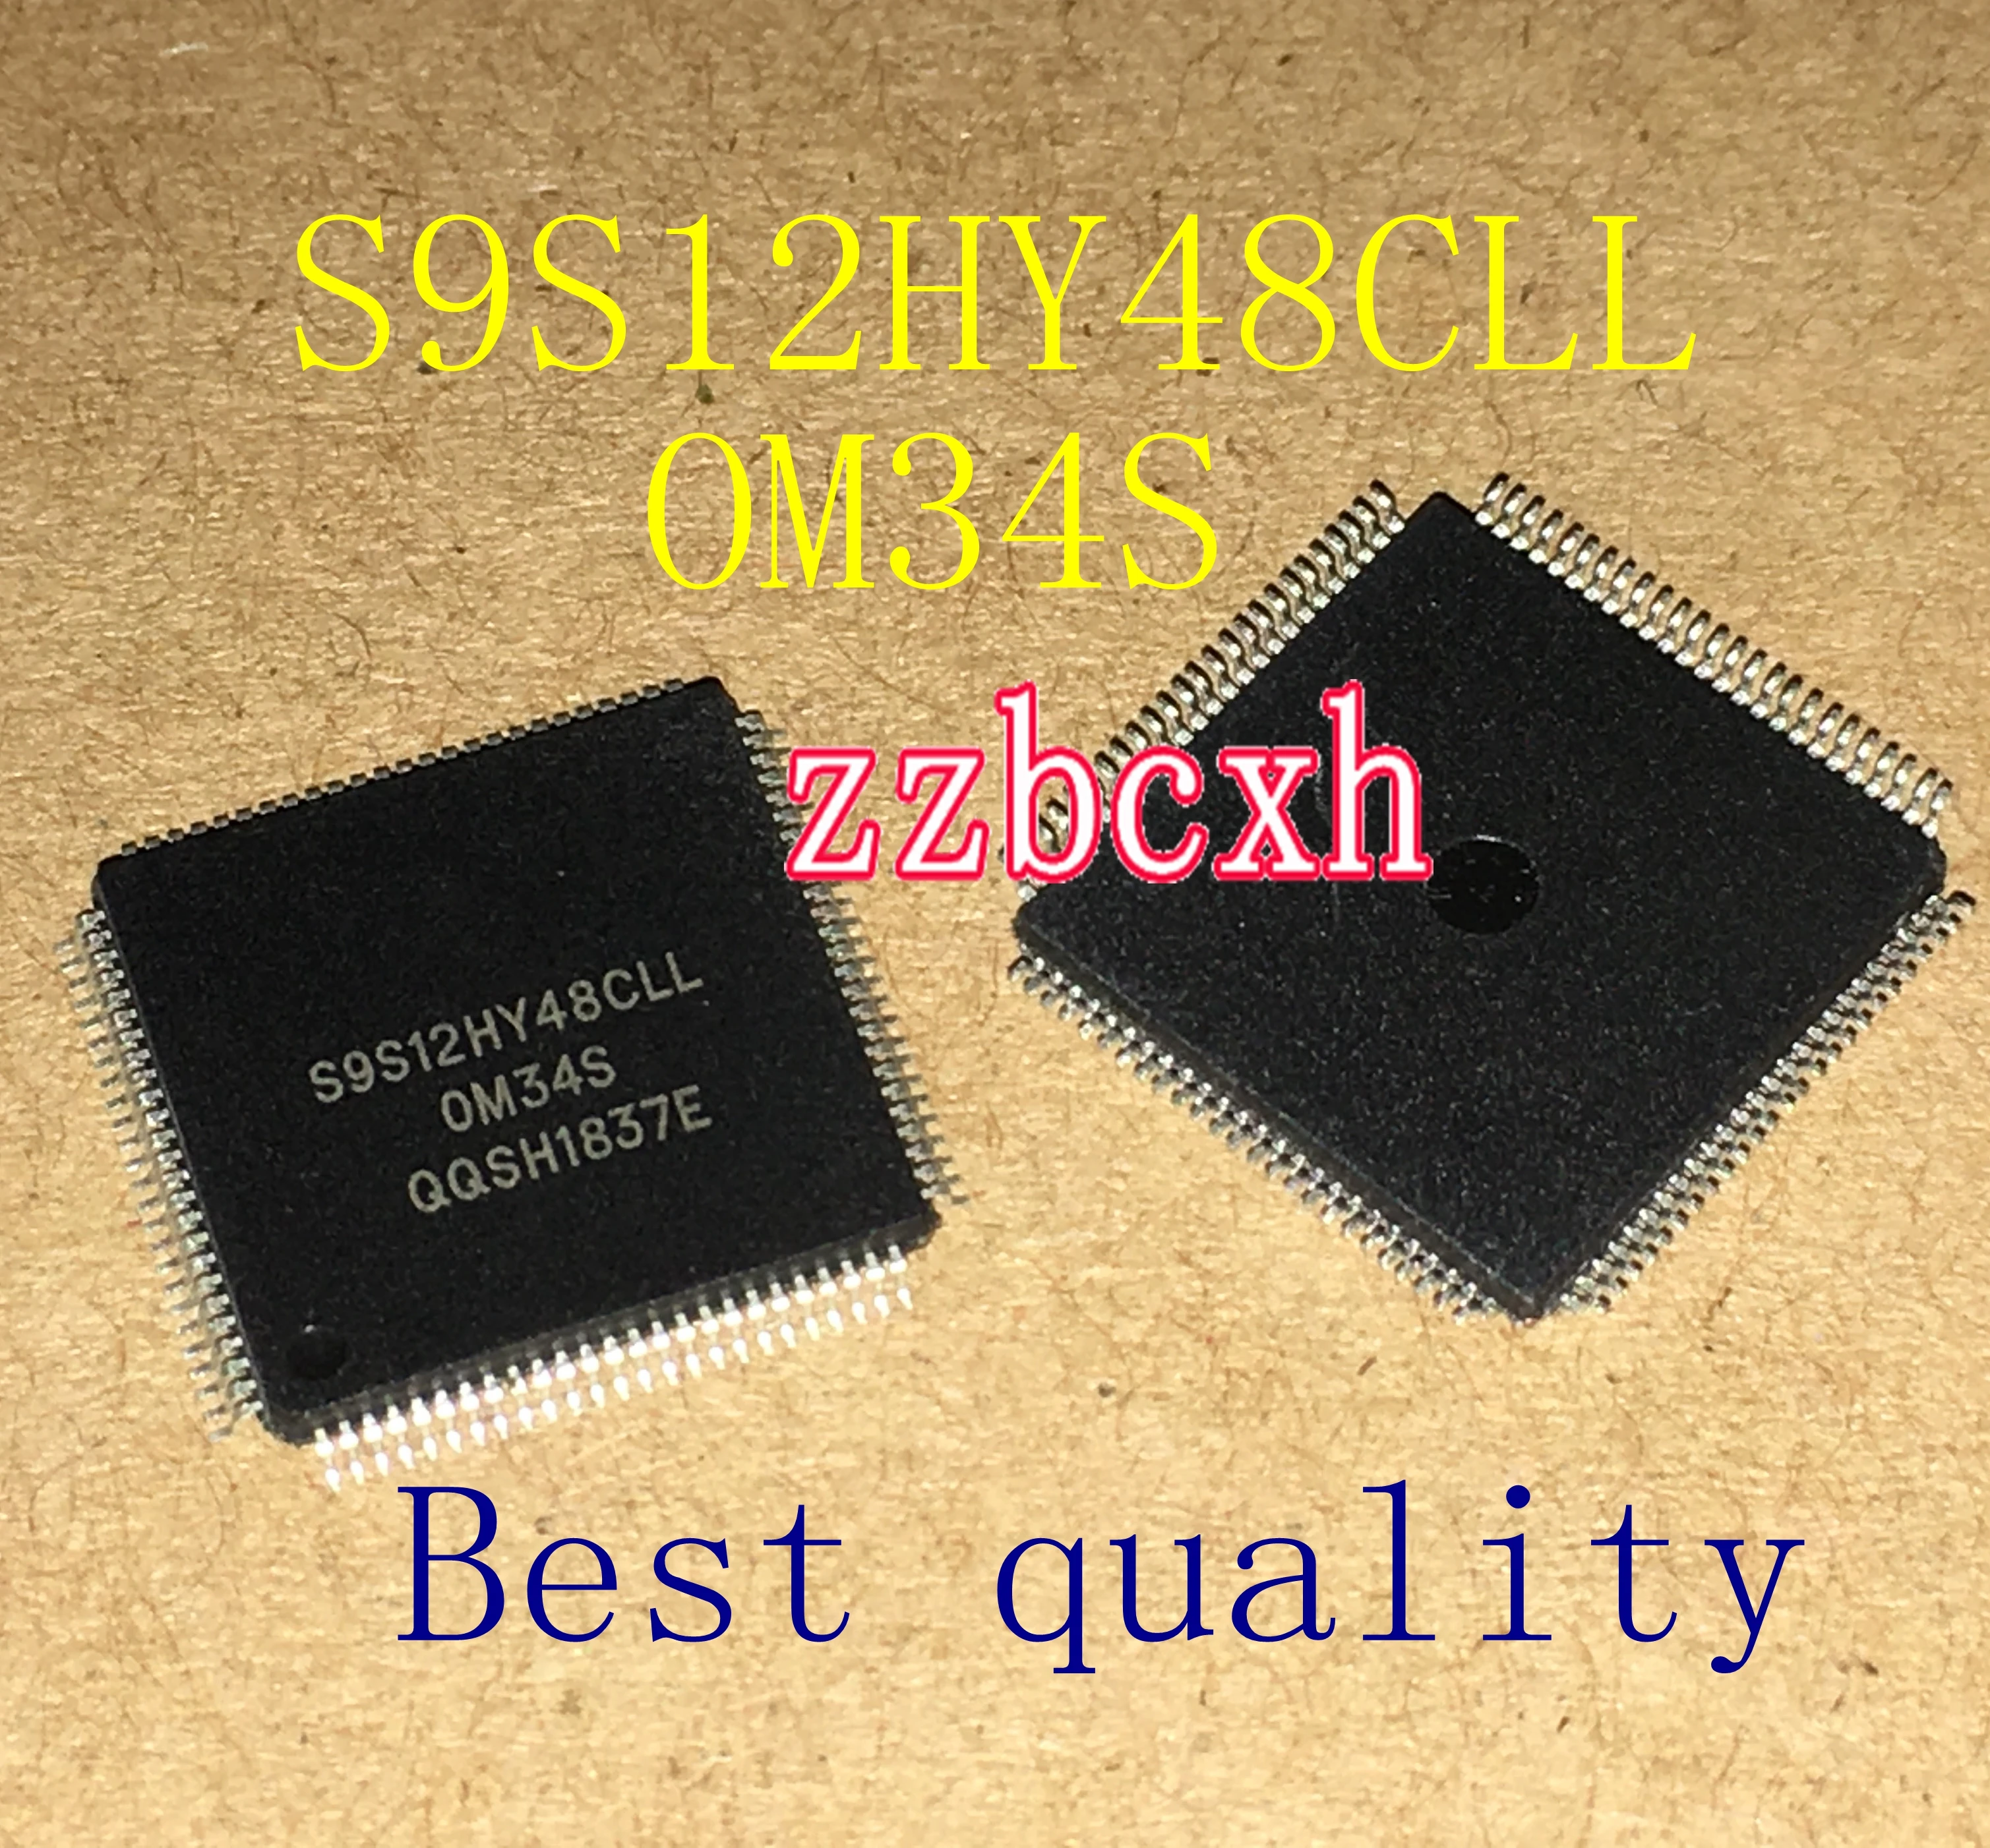 

1PCS/LOT New original In Stock S9S12HY48CLL 0M34S